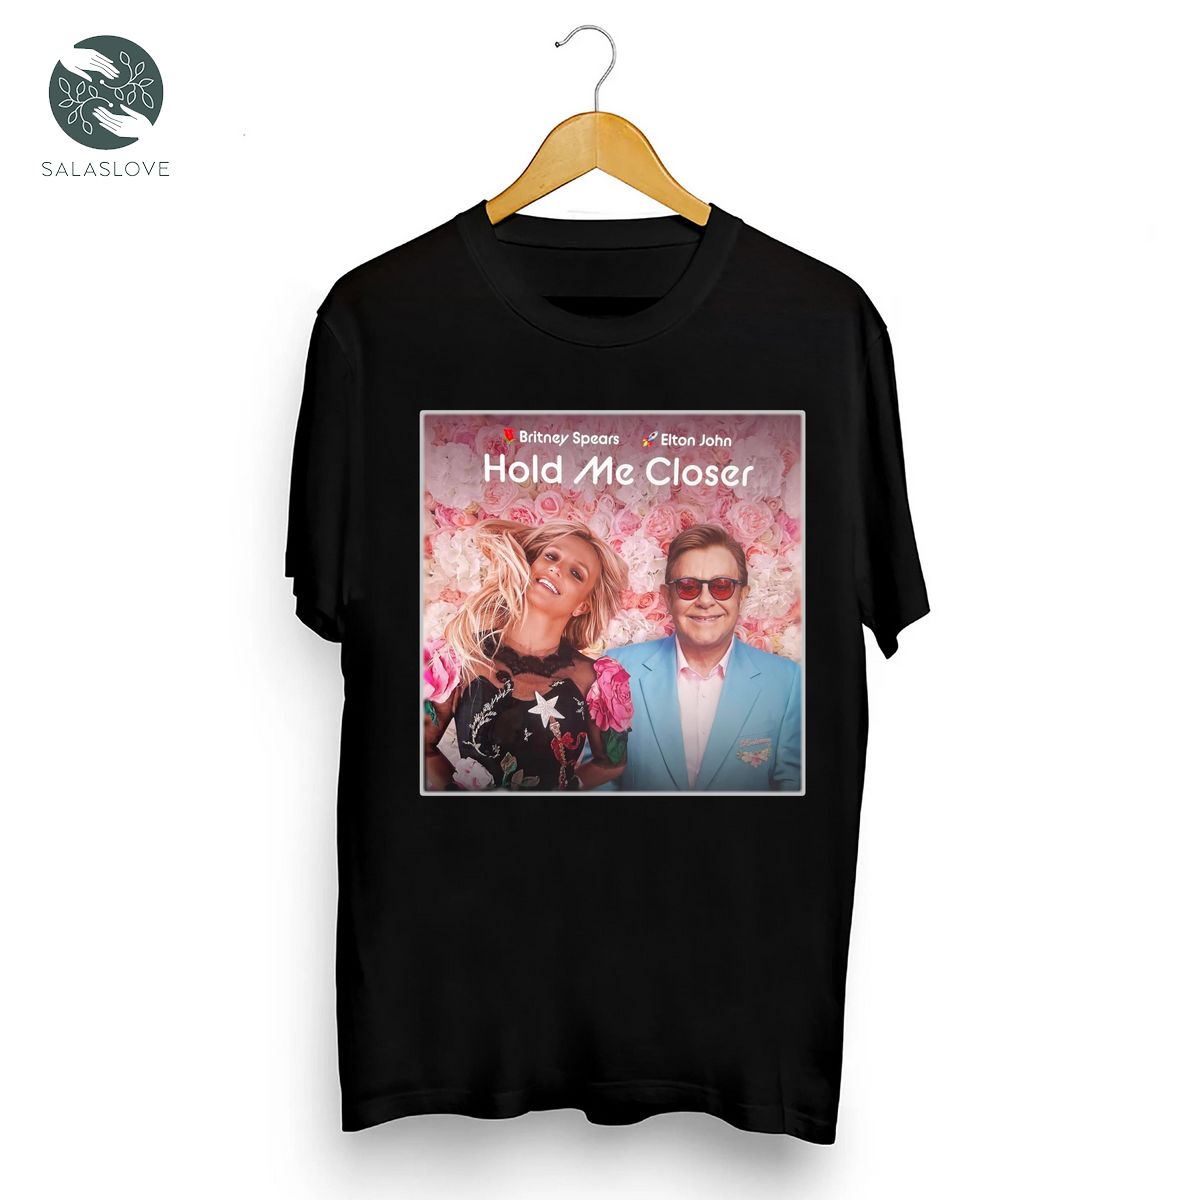 Hold Me Closer By Elton John and Britney Spears Shirt